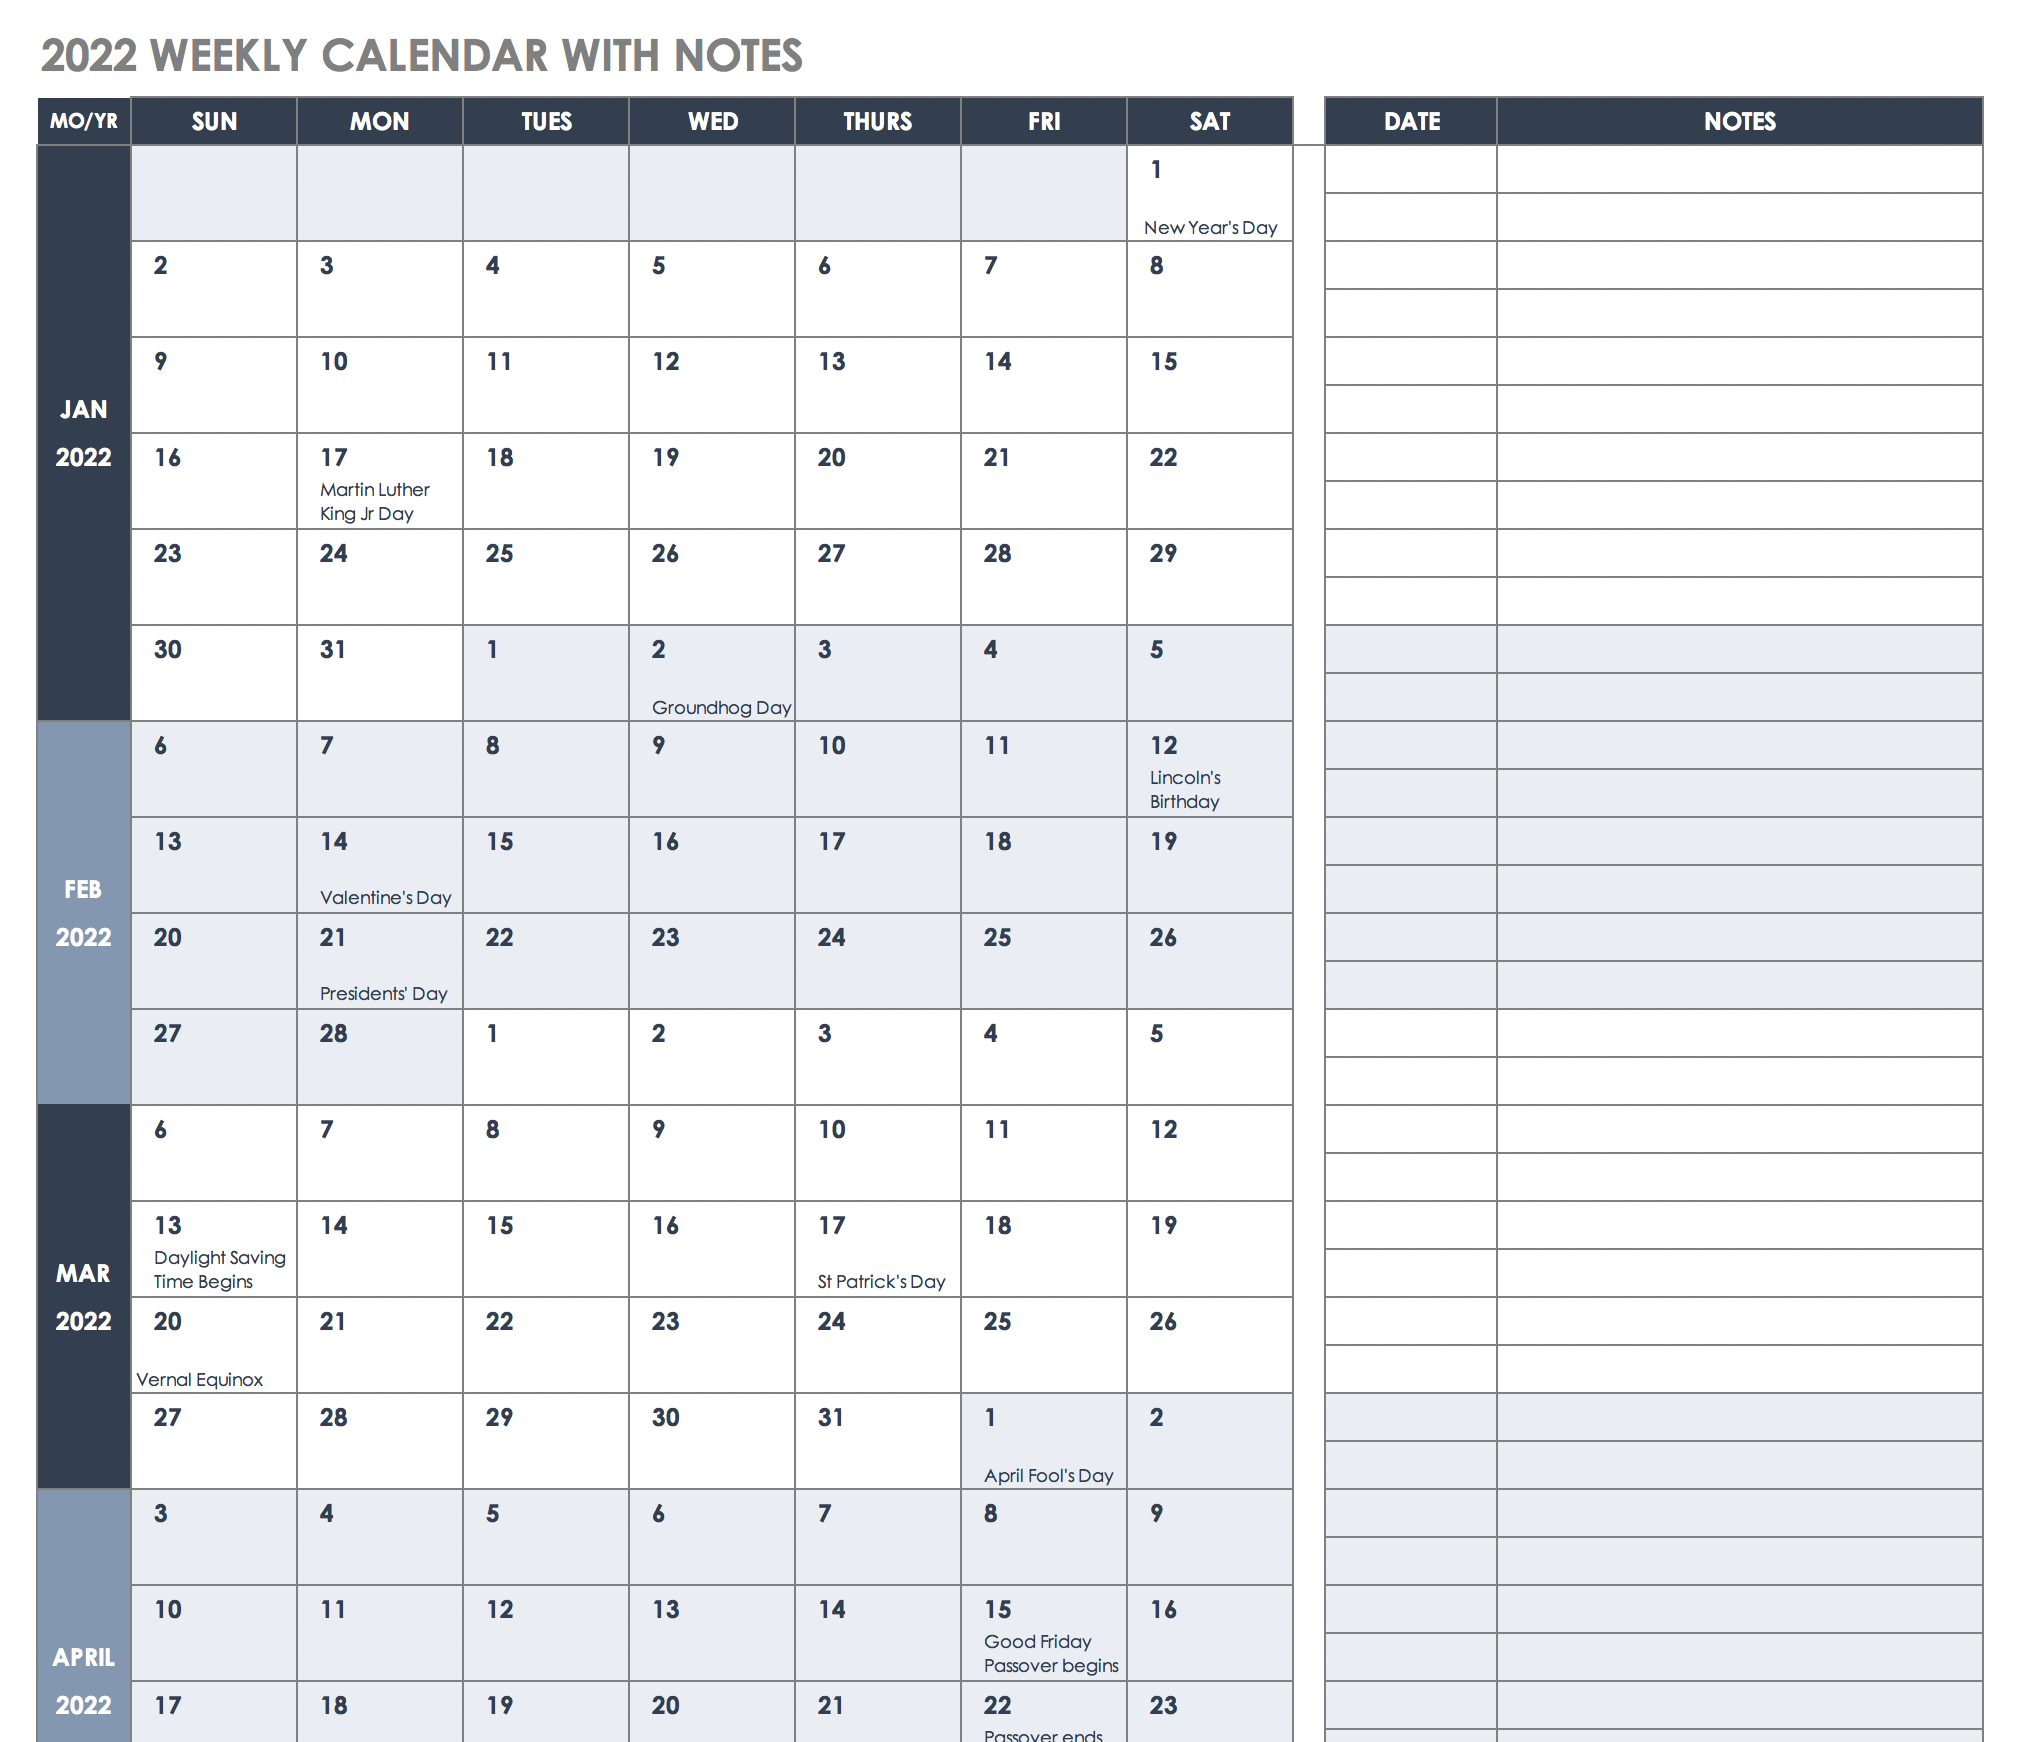 2022 Weekly Calendar with Notes Template